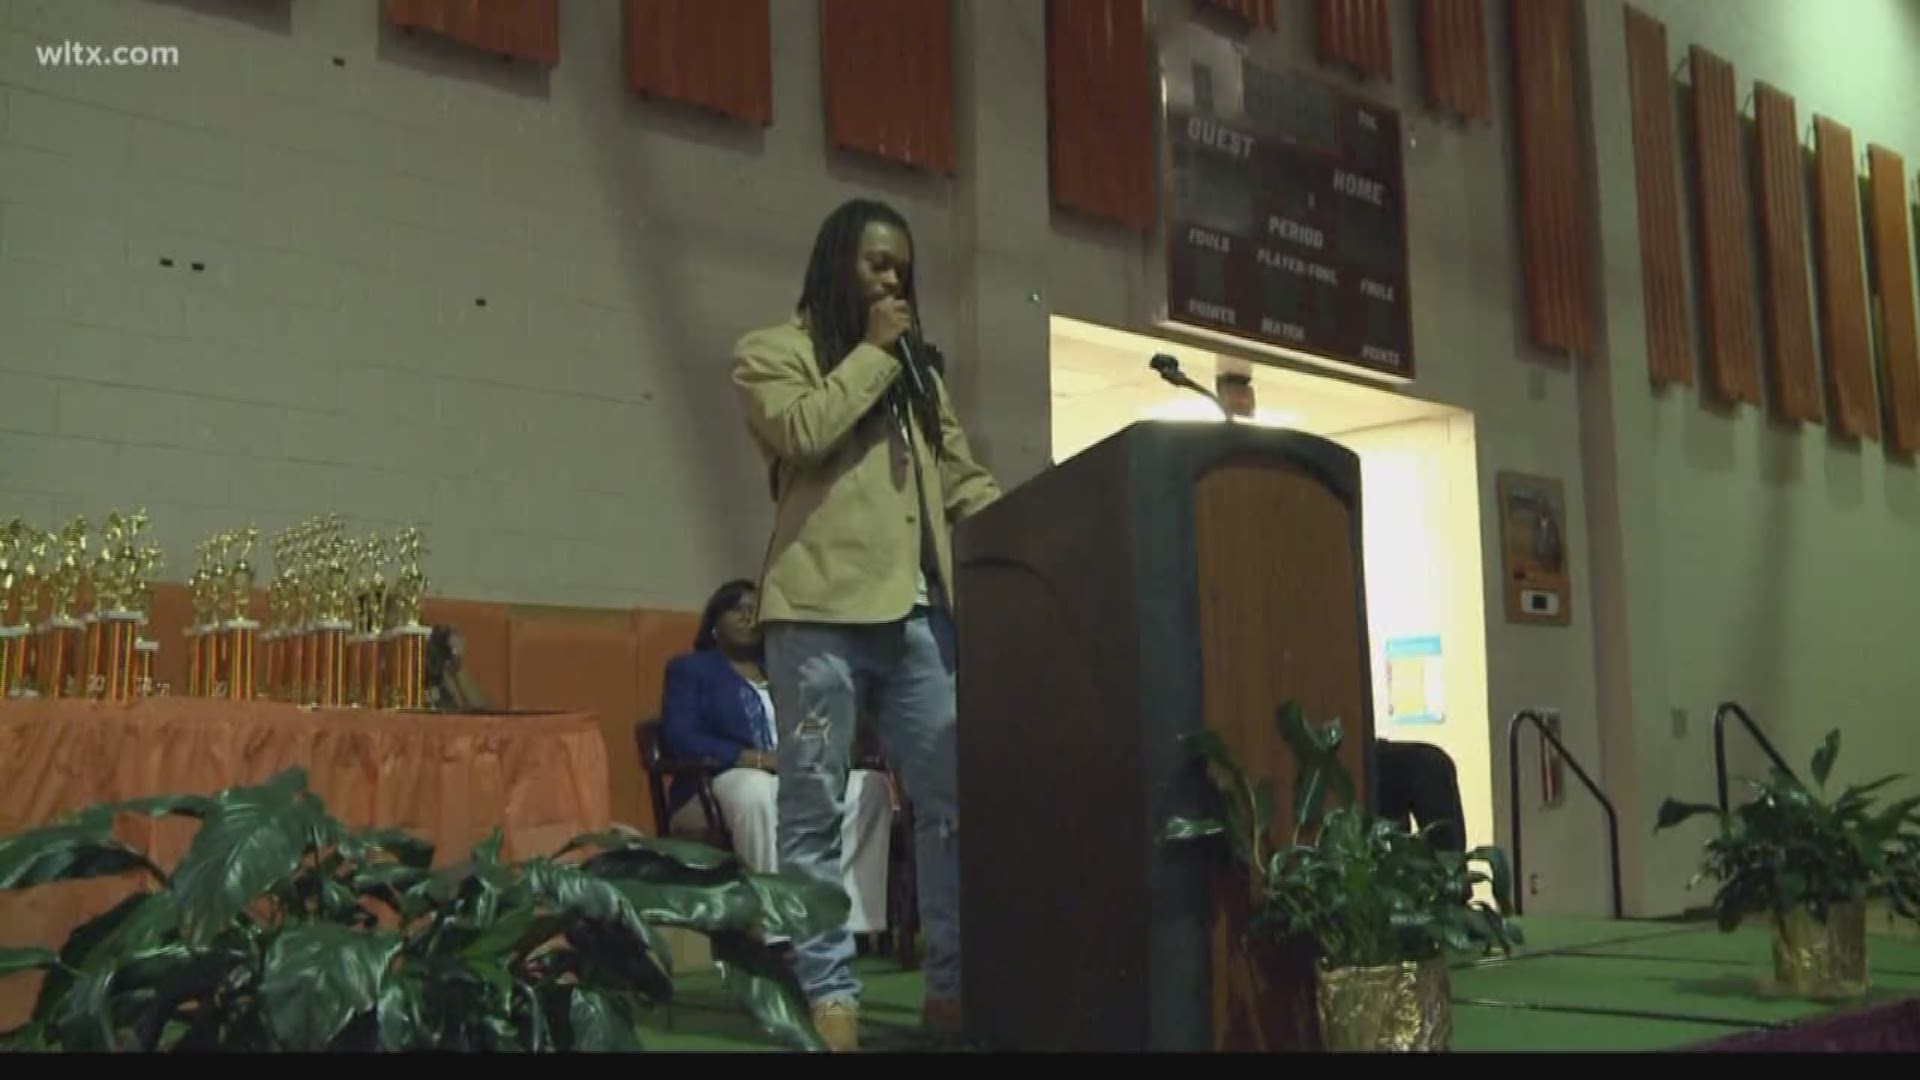 The Orangeburg-Wilkinson athletics banquet featured Ty Solomon as its guest speaker. Solomon is the former S.C. State guard whose medical emergency in Raleigh back in December was well-documented. Solomon shared his experiences in his first public speakin